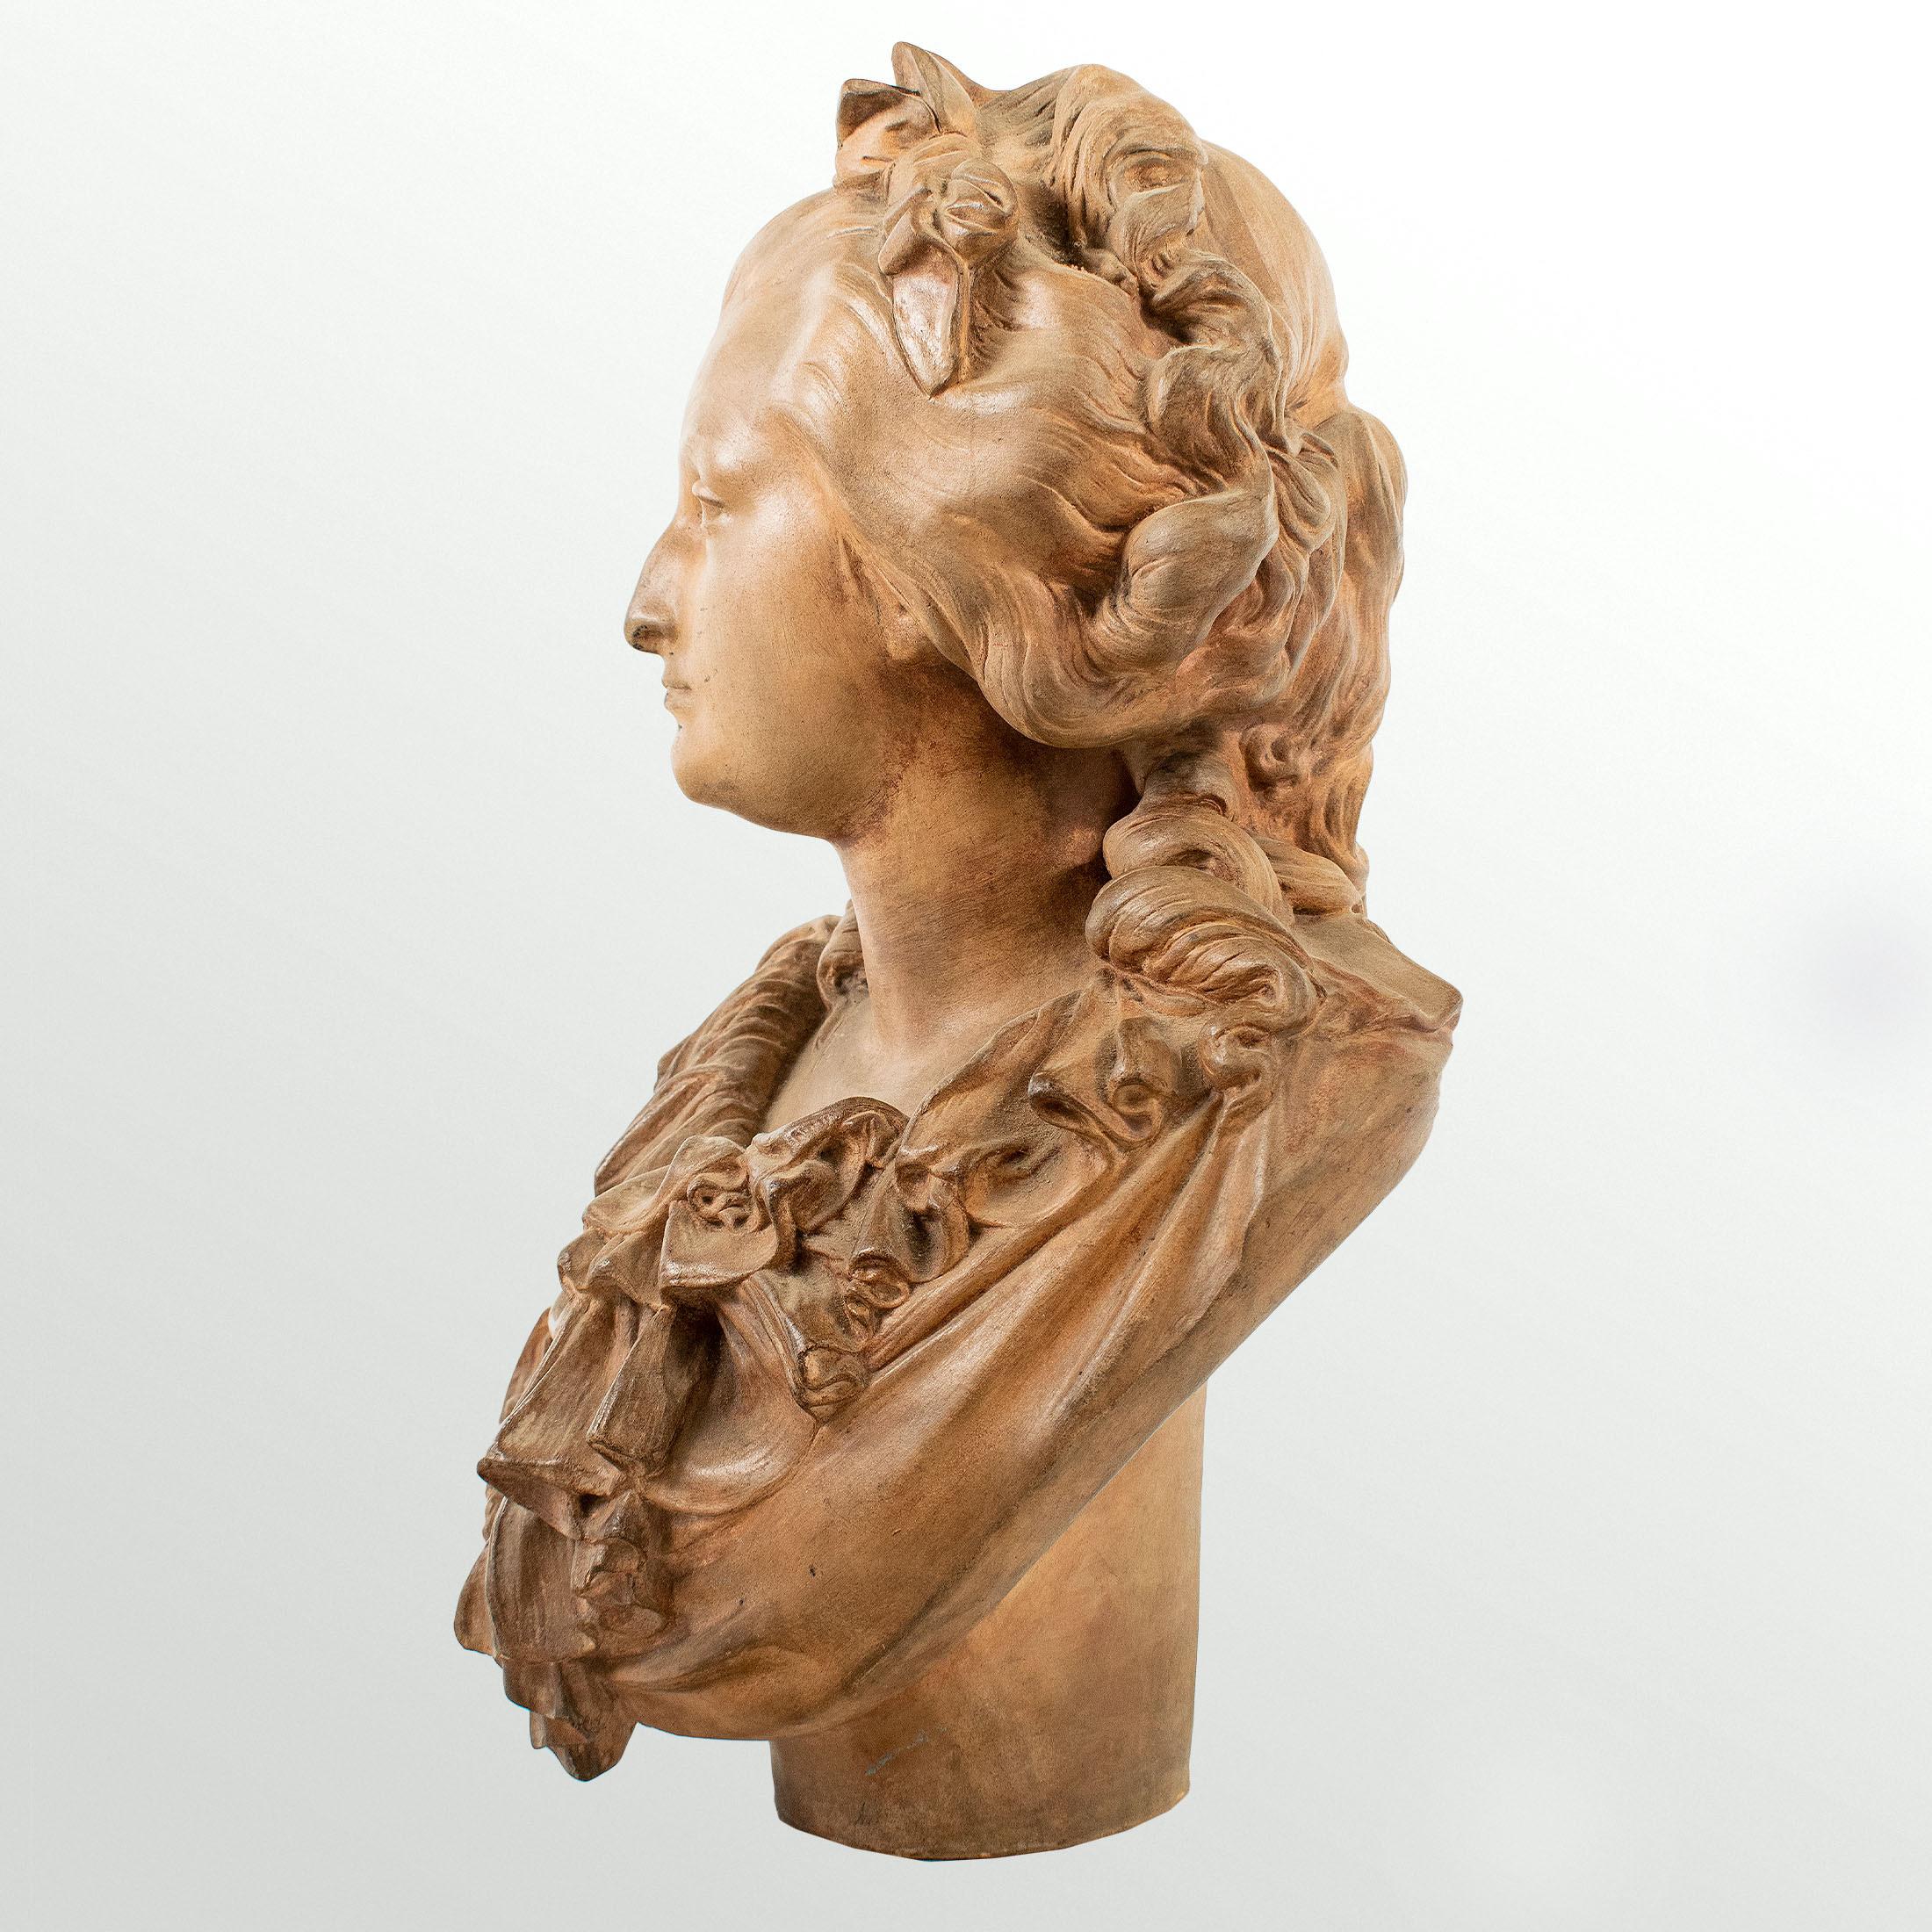 Albert-Ernest CARRIER-BELLEUSE (Anizy-le-Château, 1824 - Sèvres, 1887). Very beautiful bust of a young woman, terracotta with attractive patina. Perfect condition without base. Very beautiful object, rare, finely detailed. Around